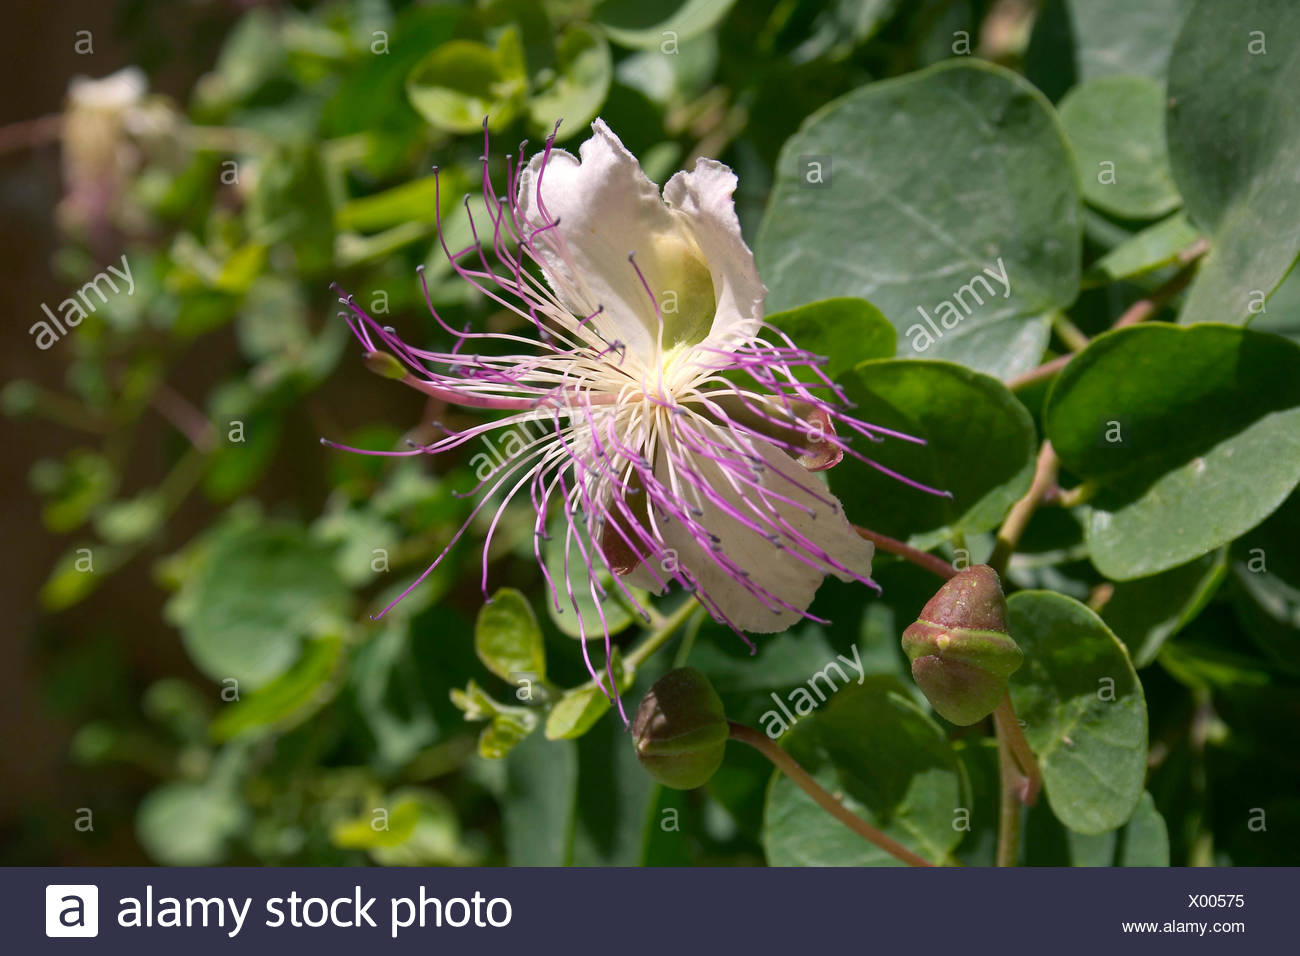 Caper Bush High Resolution Stock Photography And Images Alamy,Best Teriyaki Sauce Recipe